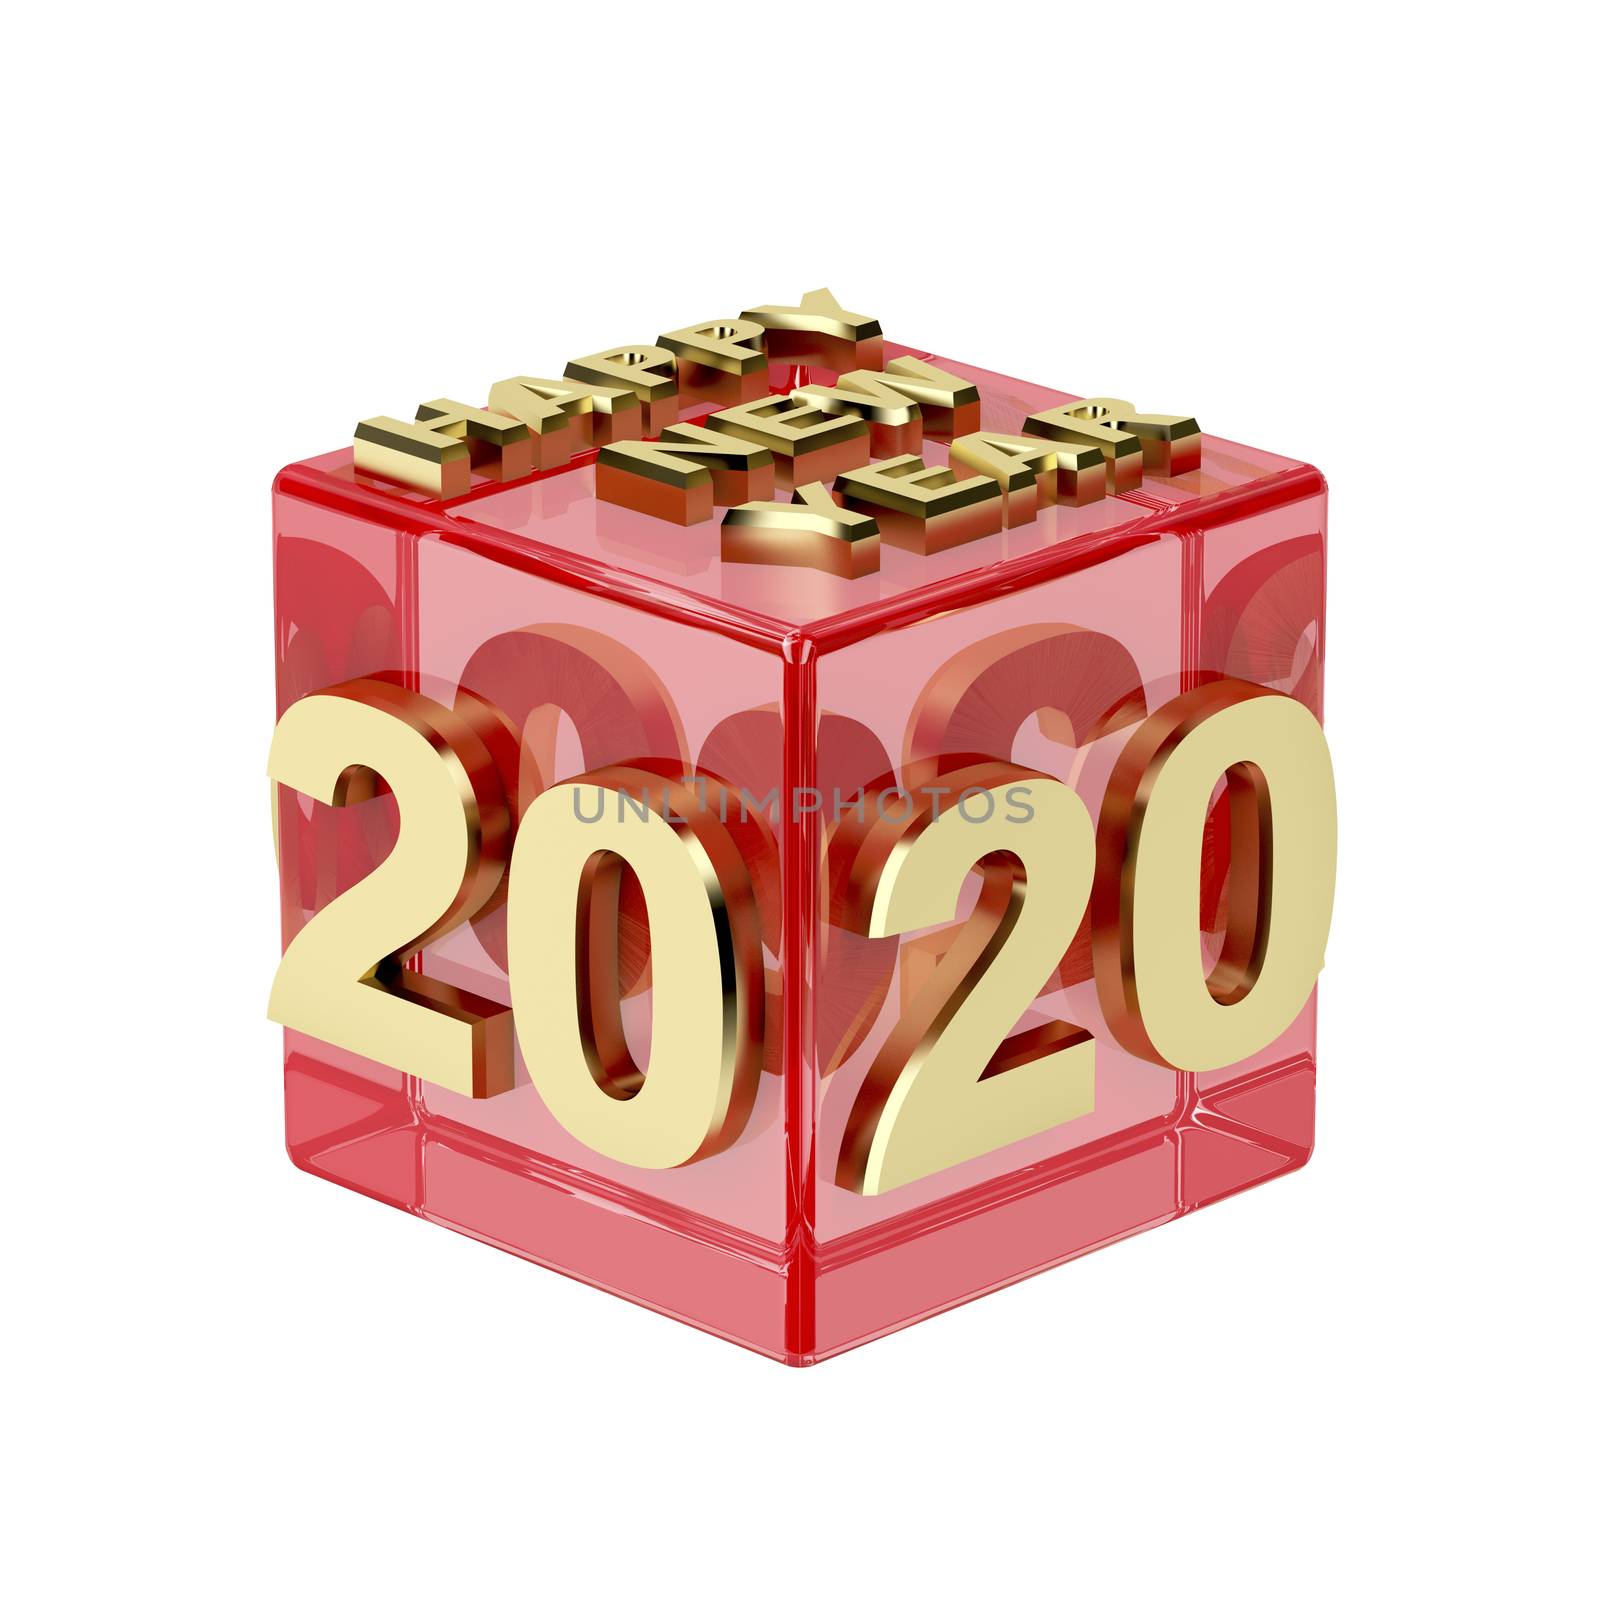 Red crystal box with golden text on it, Happy new year 2020